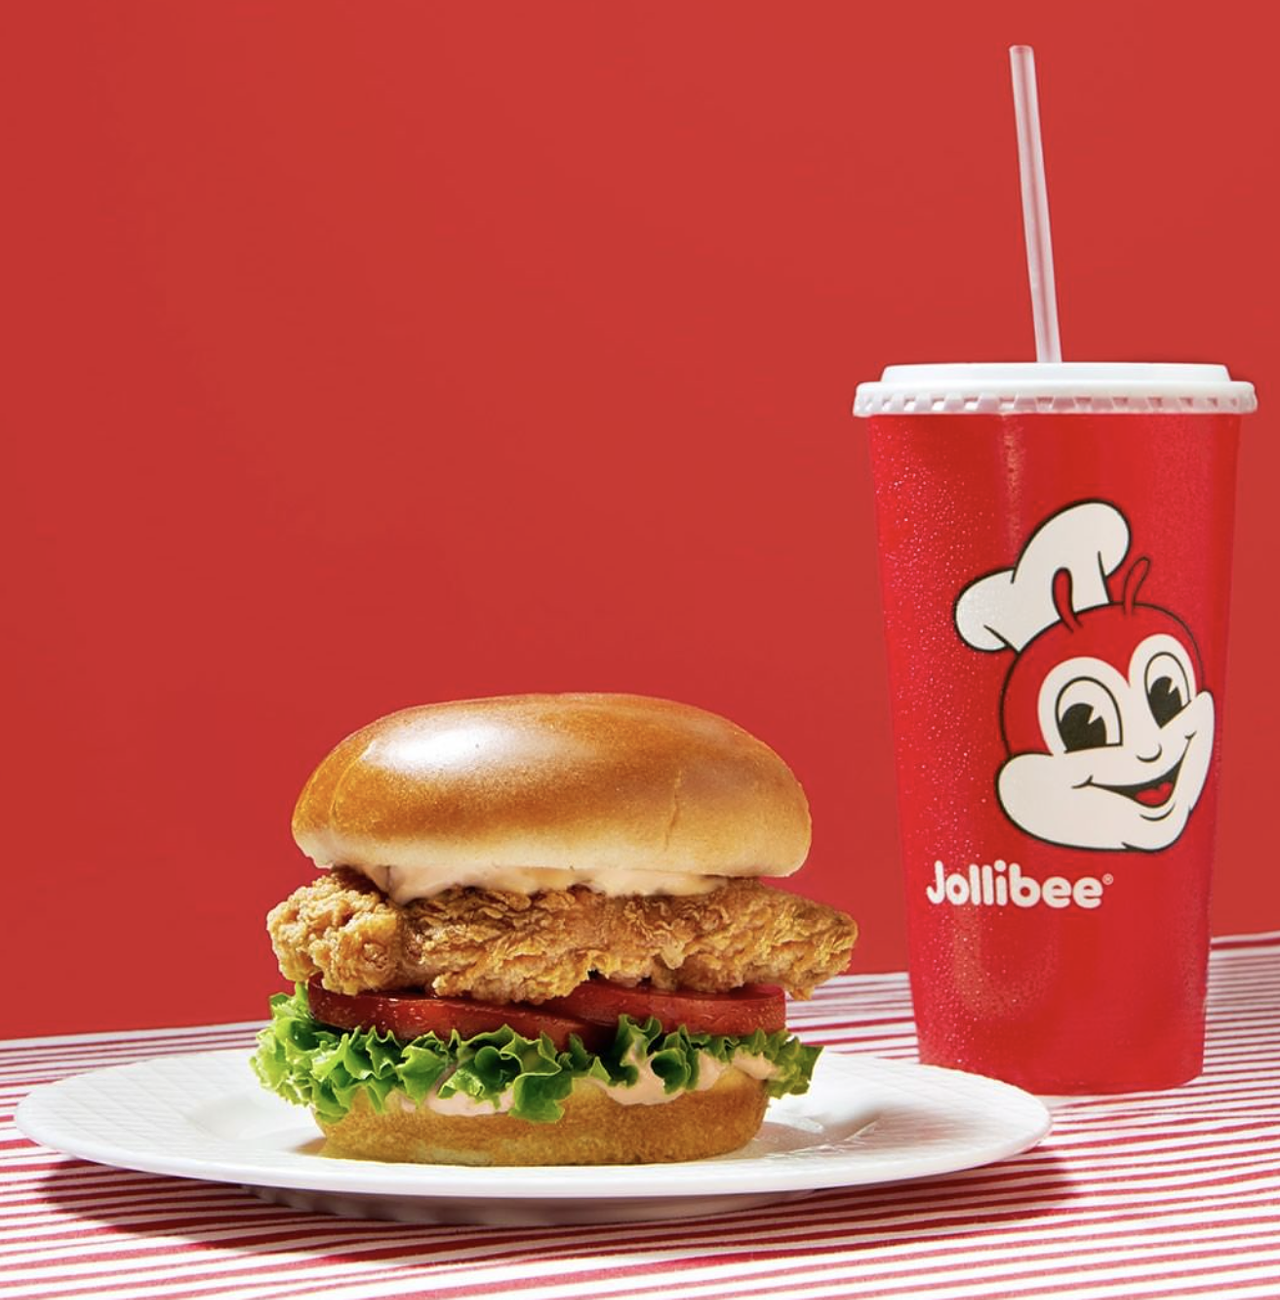 Jollibee
5033 Northwest Loop 410, (830) 328-4485,  jollibeeusa.com
From what we’ve seen, Jollibee’s first SA location seems to be living up to the chain’s cult favorite reputation. If this sandwich’s crispy breaded fillet and brioche bun don’t make your mouth water, the garlic aioli sauce definitely will. Available in the streamlined classic version and a deluxe with all the fixings. 
Photo via Instagram /  jollibeeus